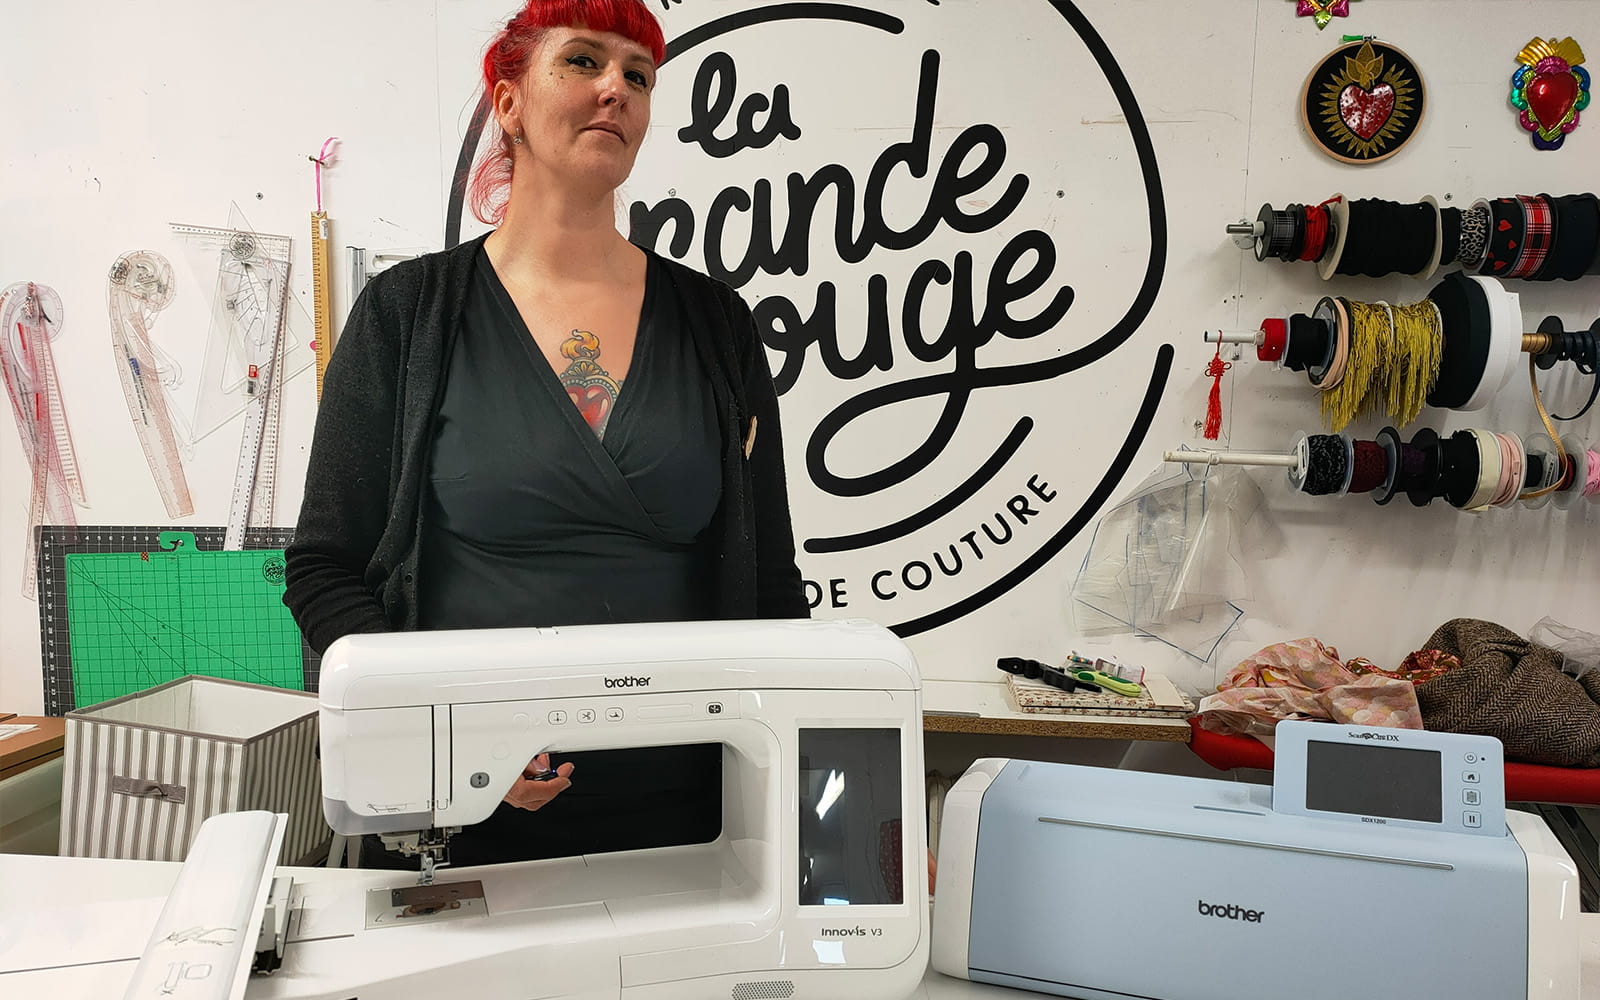 A red headed woman stands behind a sewing machine